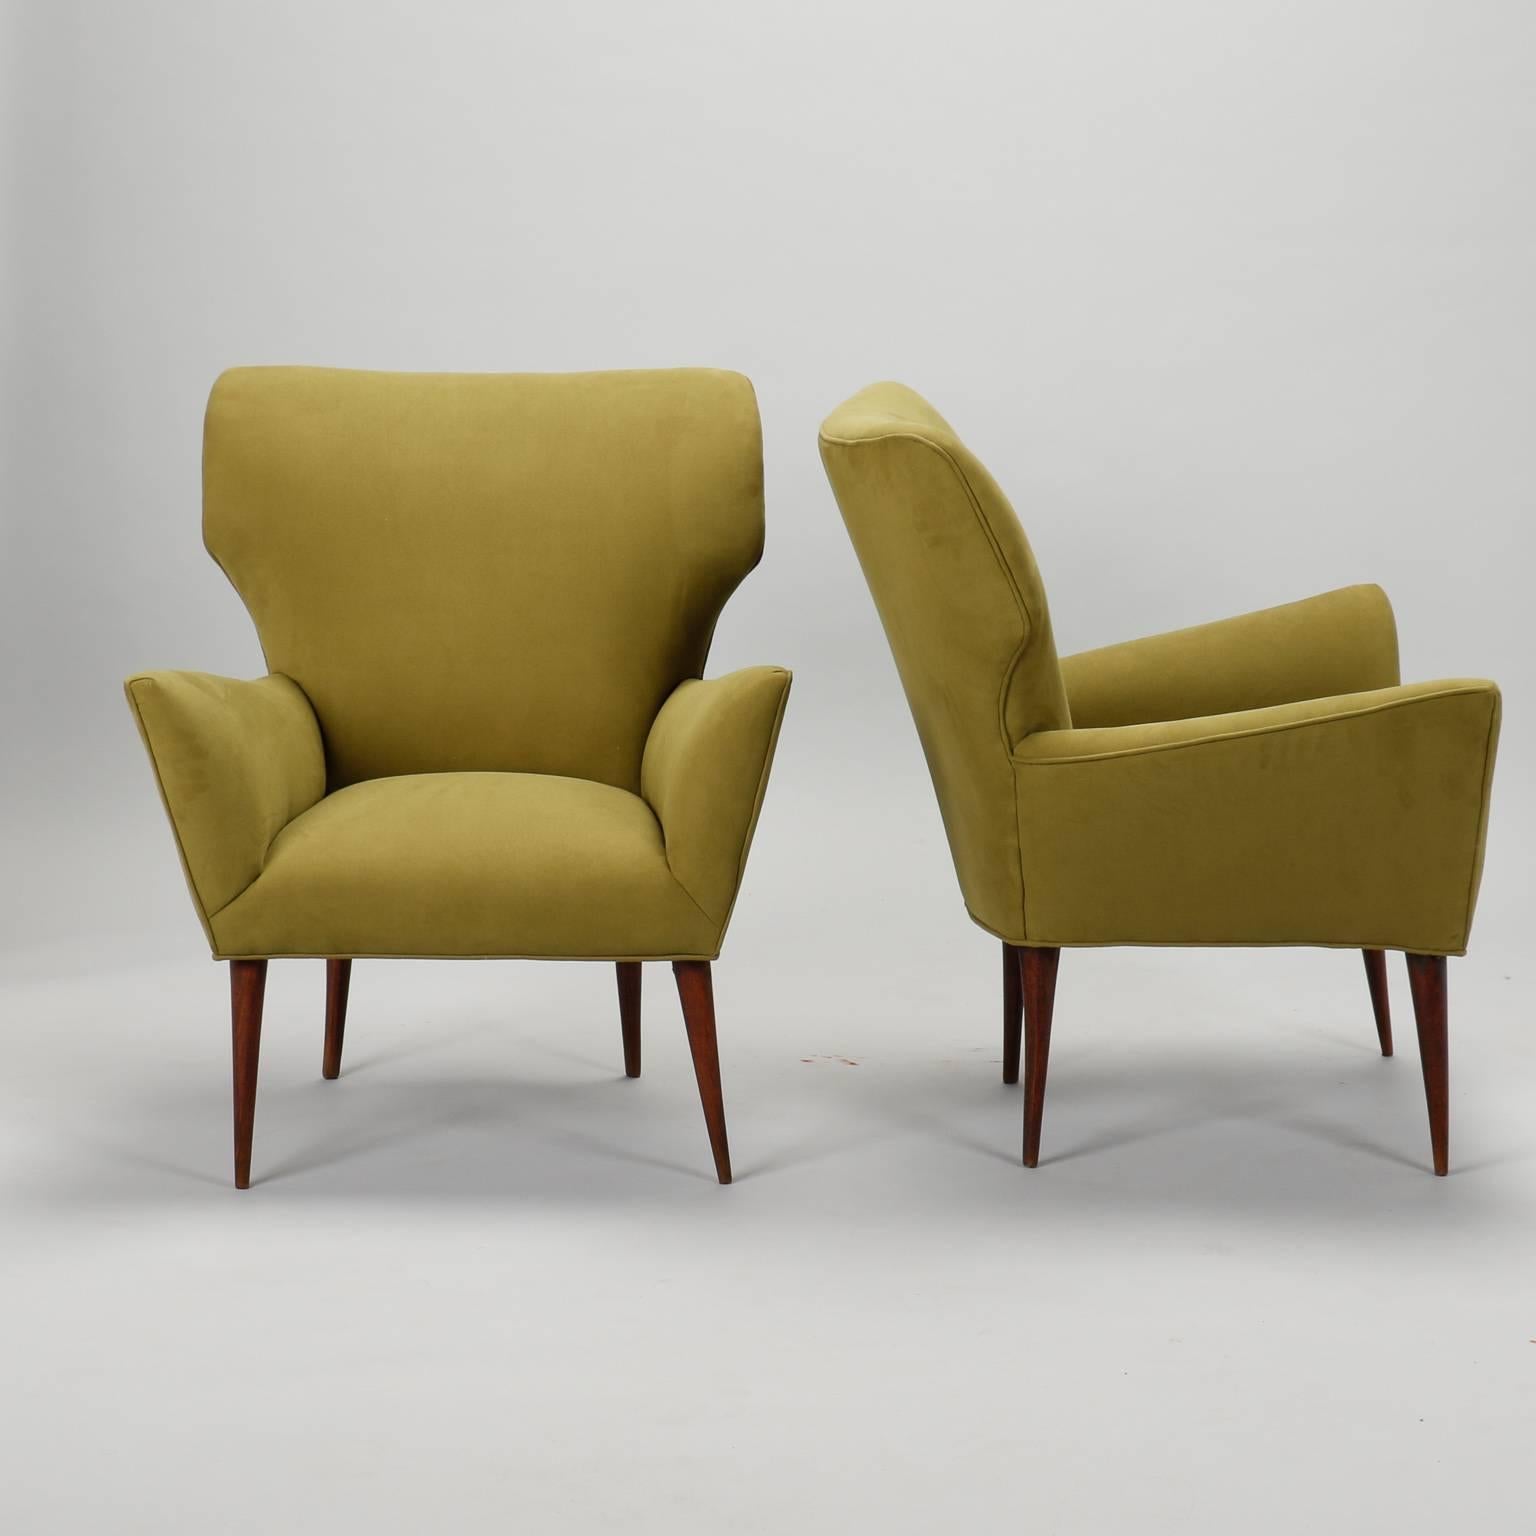 Circa late 1950s-early 1960s pair of Italian armchairs has been newly upholstered in olive green micro suede. Tapered wood legs, curvy Mid-Century Italian styling. Measures: Seats are 15.75” high and 17.5” deep. Arms are 22” high. Sold and priced as